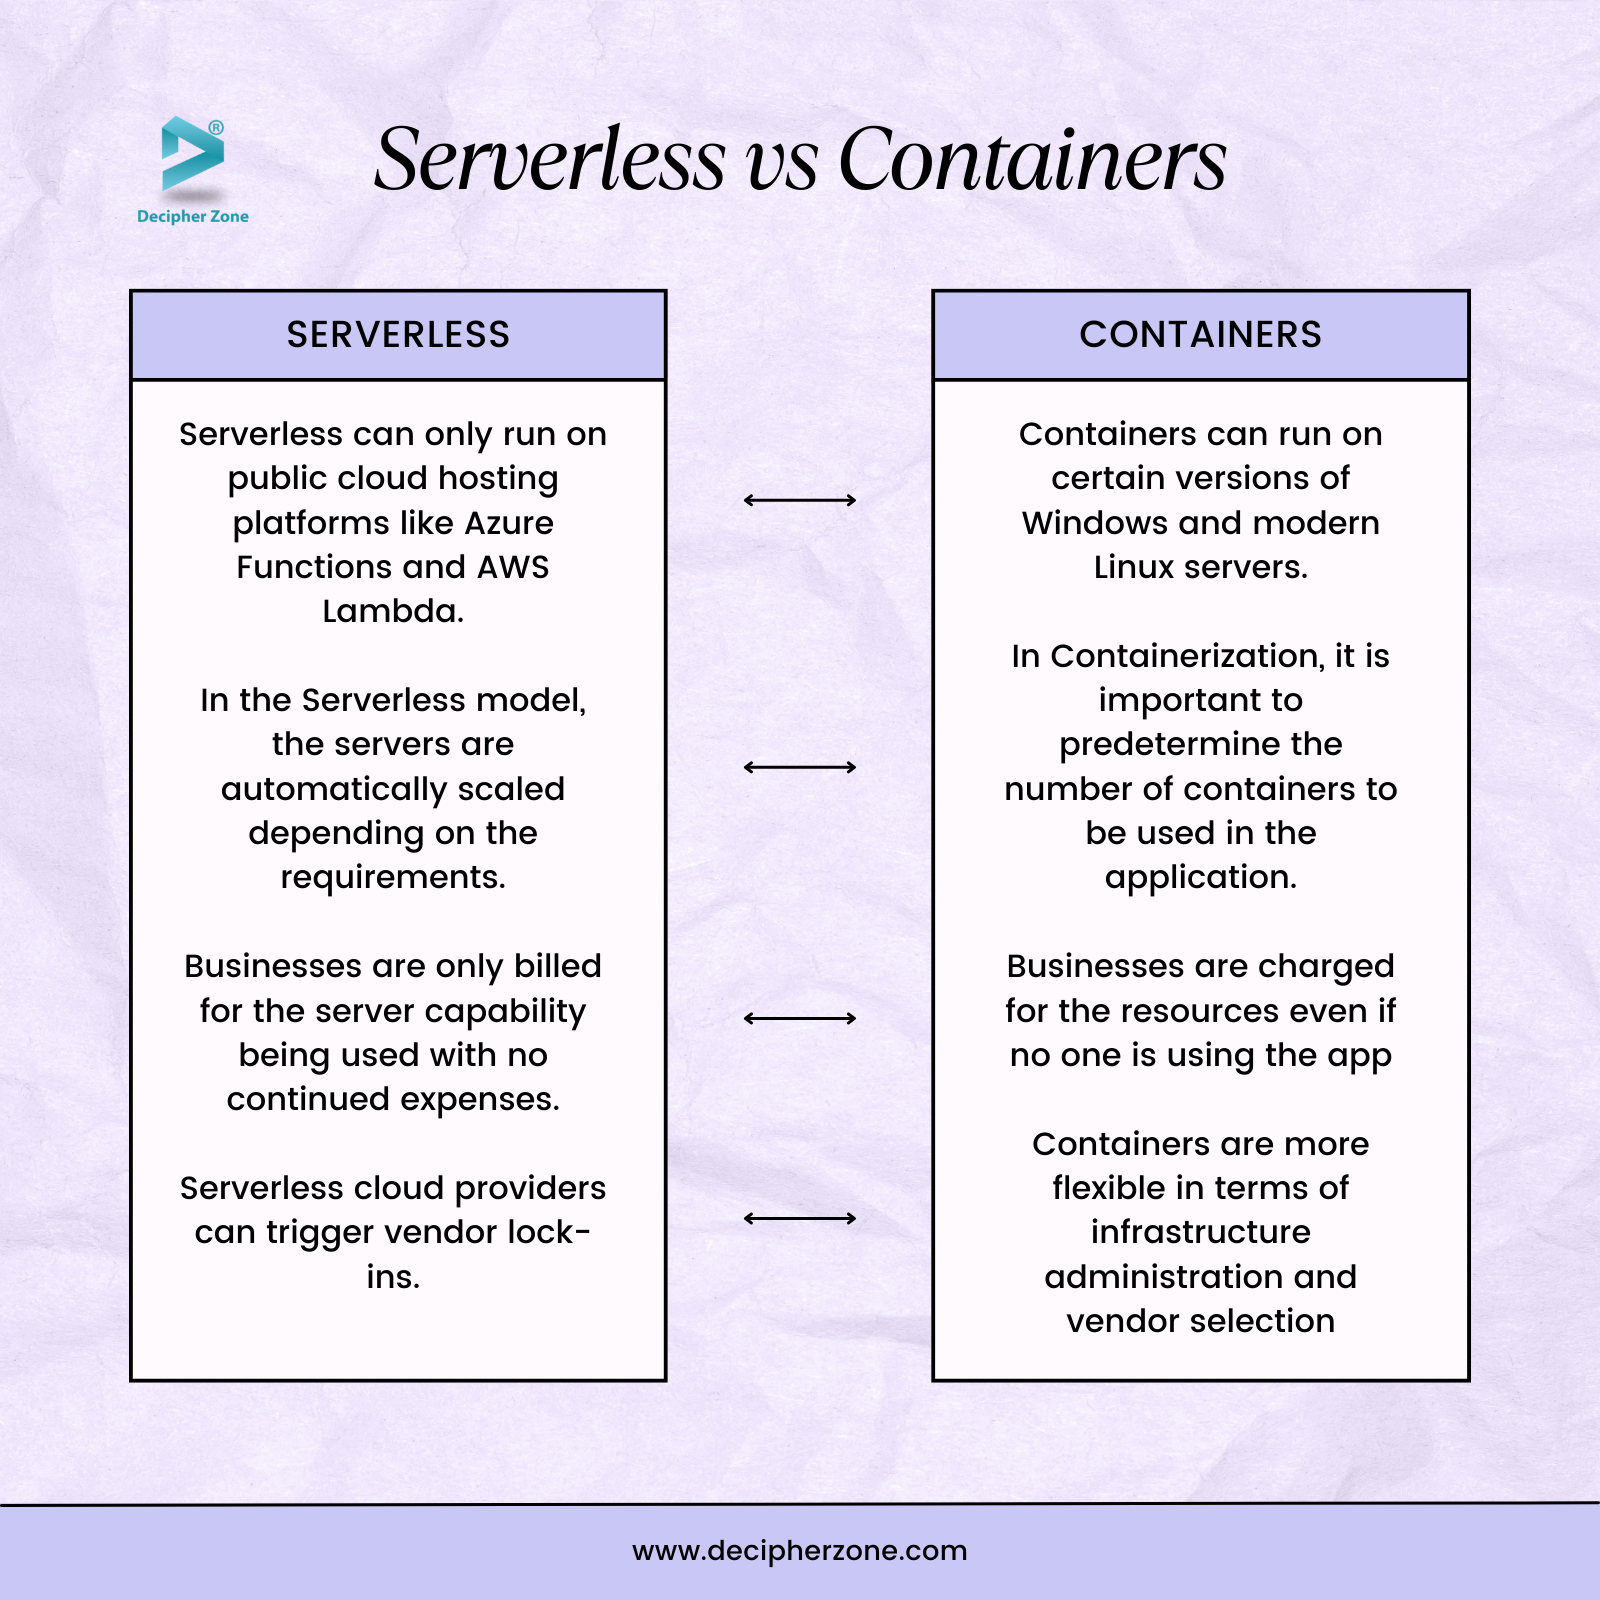 Serverless v/s Containers